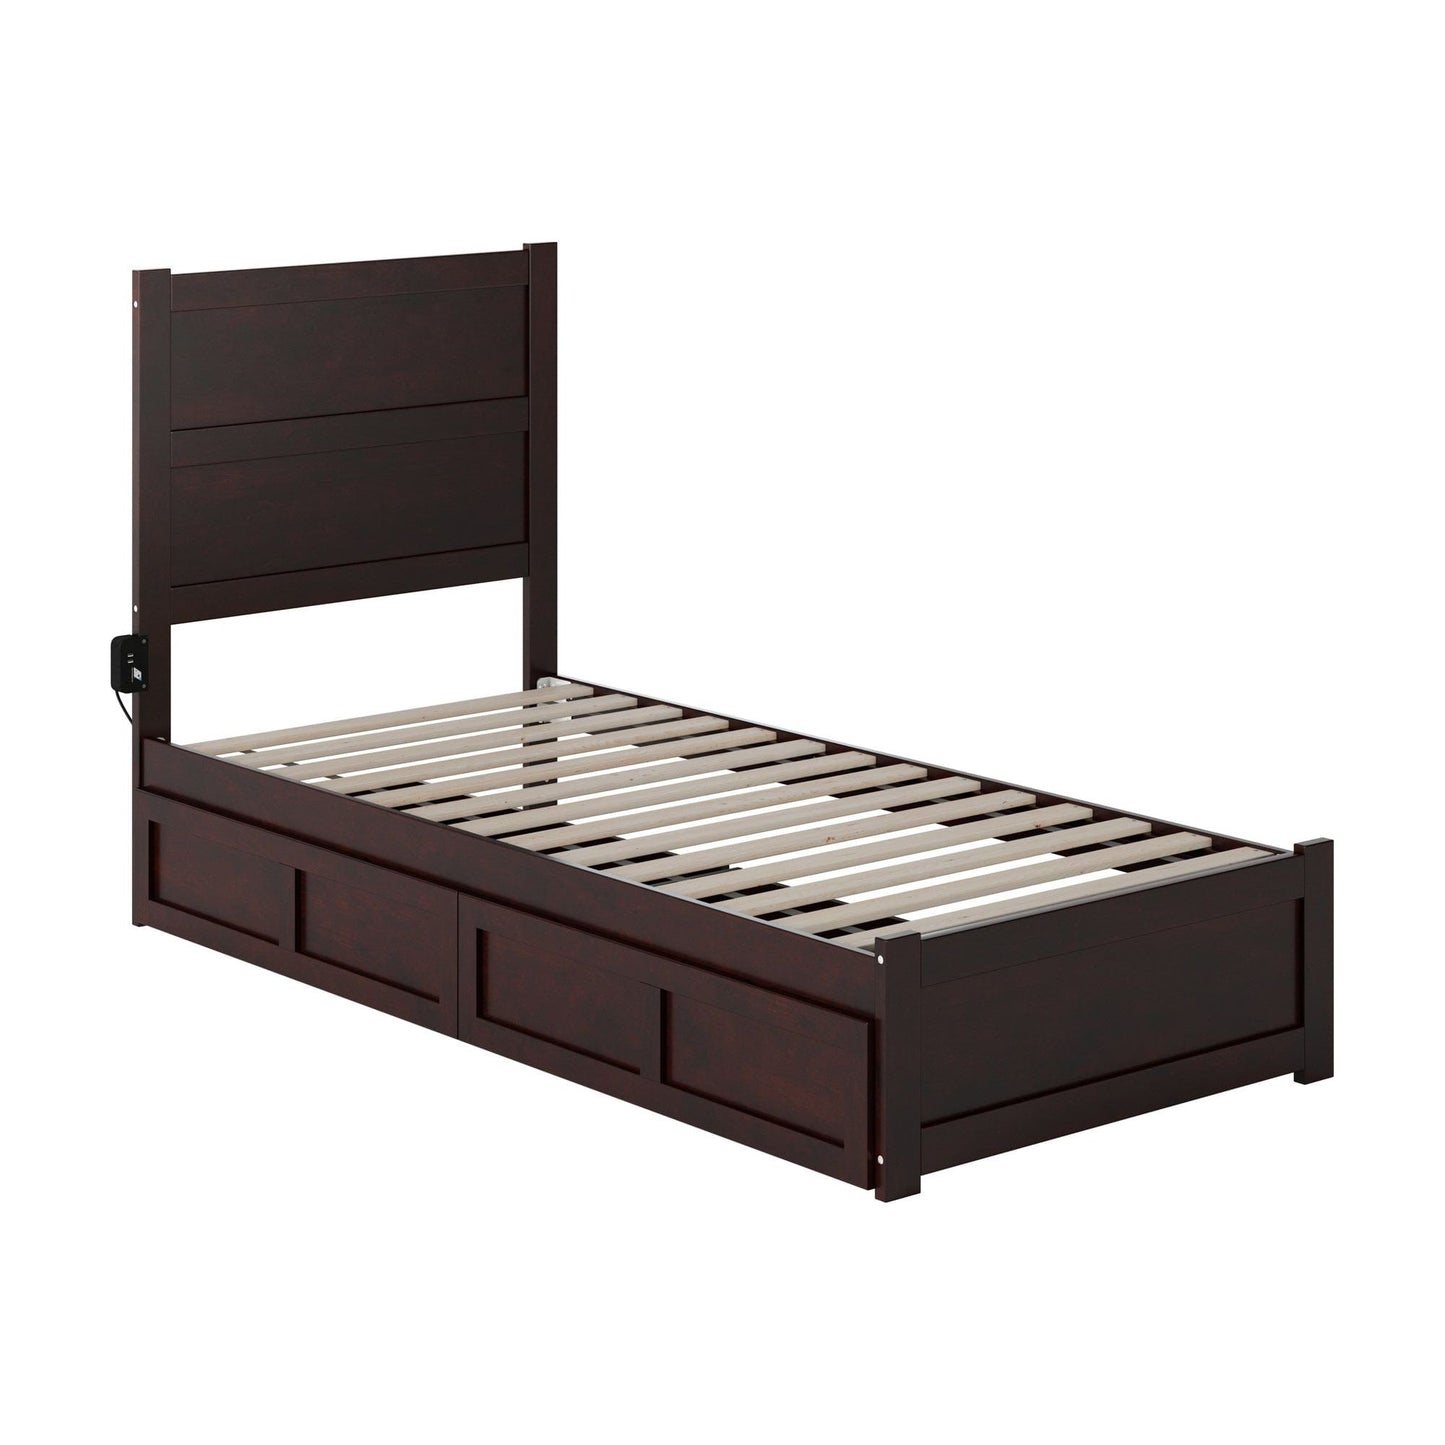 AFI Furnishings NoHo Twin Extra Long Bed with Footboard and 2 Drawers in Espresso